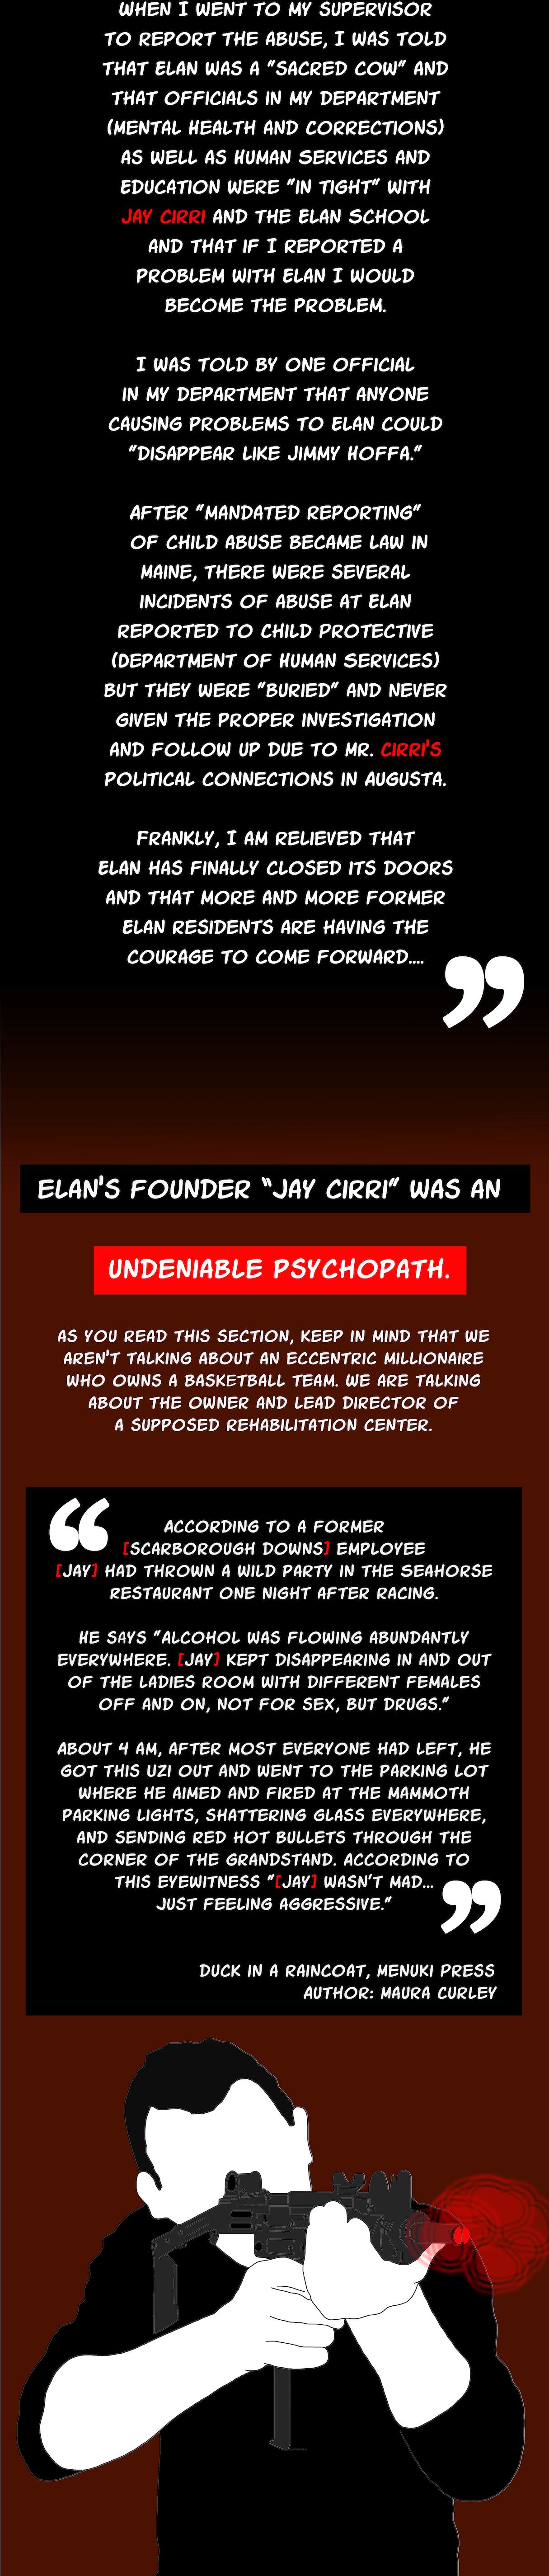 When I went to my supervisor to report the abuse, I was told that Elan was a "sacred cow" and that officials in my department (Mental Health and Corrections) as well as Human Services and Education were "in tight" with Jay cirri and the Elan School and that if I reported a problem with Elan I would become the problem. I was told by one official in my department that anyone causing problems to Elan could "disappear like Jimmy Hoffa." After "mandated reporting" of child abuse became law in Maine, there were several incidents of abuse at Elan reported to Child Protective (Department of Human Services) but they were "buried" and never given the proper investigation and follow up due to Mr. Ricci's political connections in Augusta. Frankly, I am relieved that Elan has finally closed its doors and that more and more former Elan residents are having the courage to come forward...., that I recently found., let me share something with you, undeniable psychopath., elan’s founder “jay cirri” was an, According to a former [scarborough downs] employee [Jay] had thrown a wild party in the Seahorse Restaurant one night after racing. He says "Alcohol was flowing abundantly everywhere. [Jay] kept disappearing in and out of the ladies room with different females off and on, not for sex, but drugs." About 4 am, after most everyone had left, he got this Uzi out and went to the parking lot where he aimed and fired at the mammoth parking lights, shattering glass everywhere, and sending red hot bullets through the corner of the grandstand. According to this eyewitness "[Jay] wasn't mad... just feeling aggressive." duck in a raincoat, Menuki Press Author: Maura Curley, 